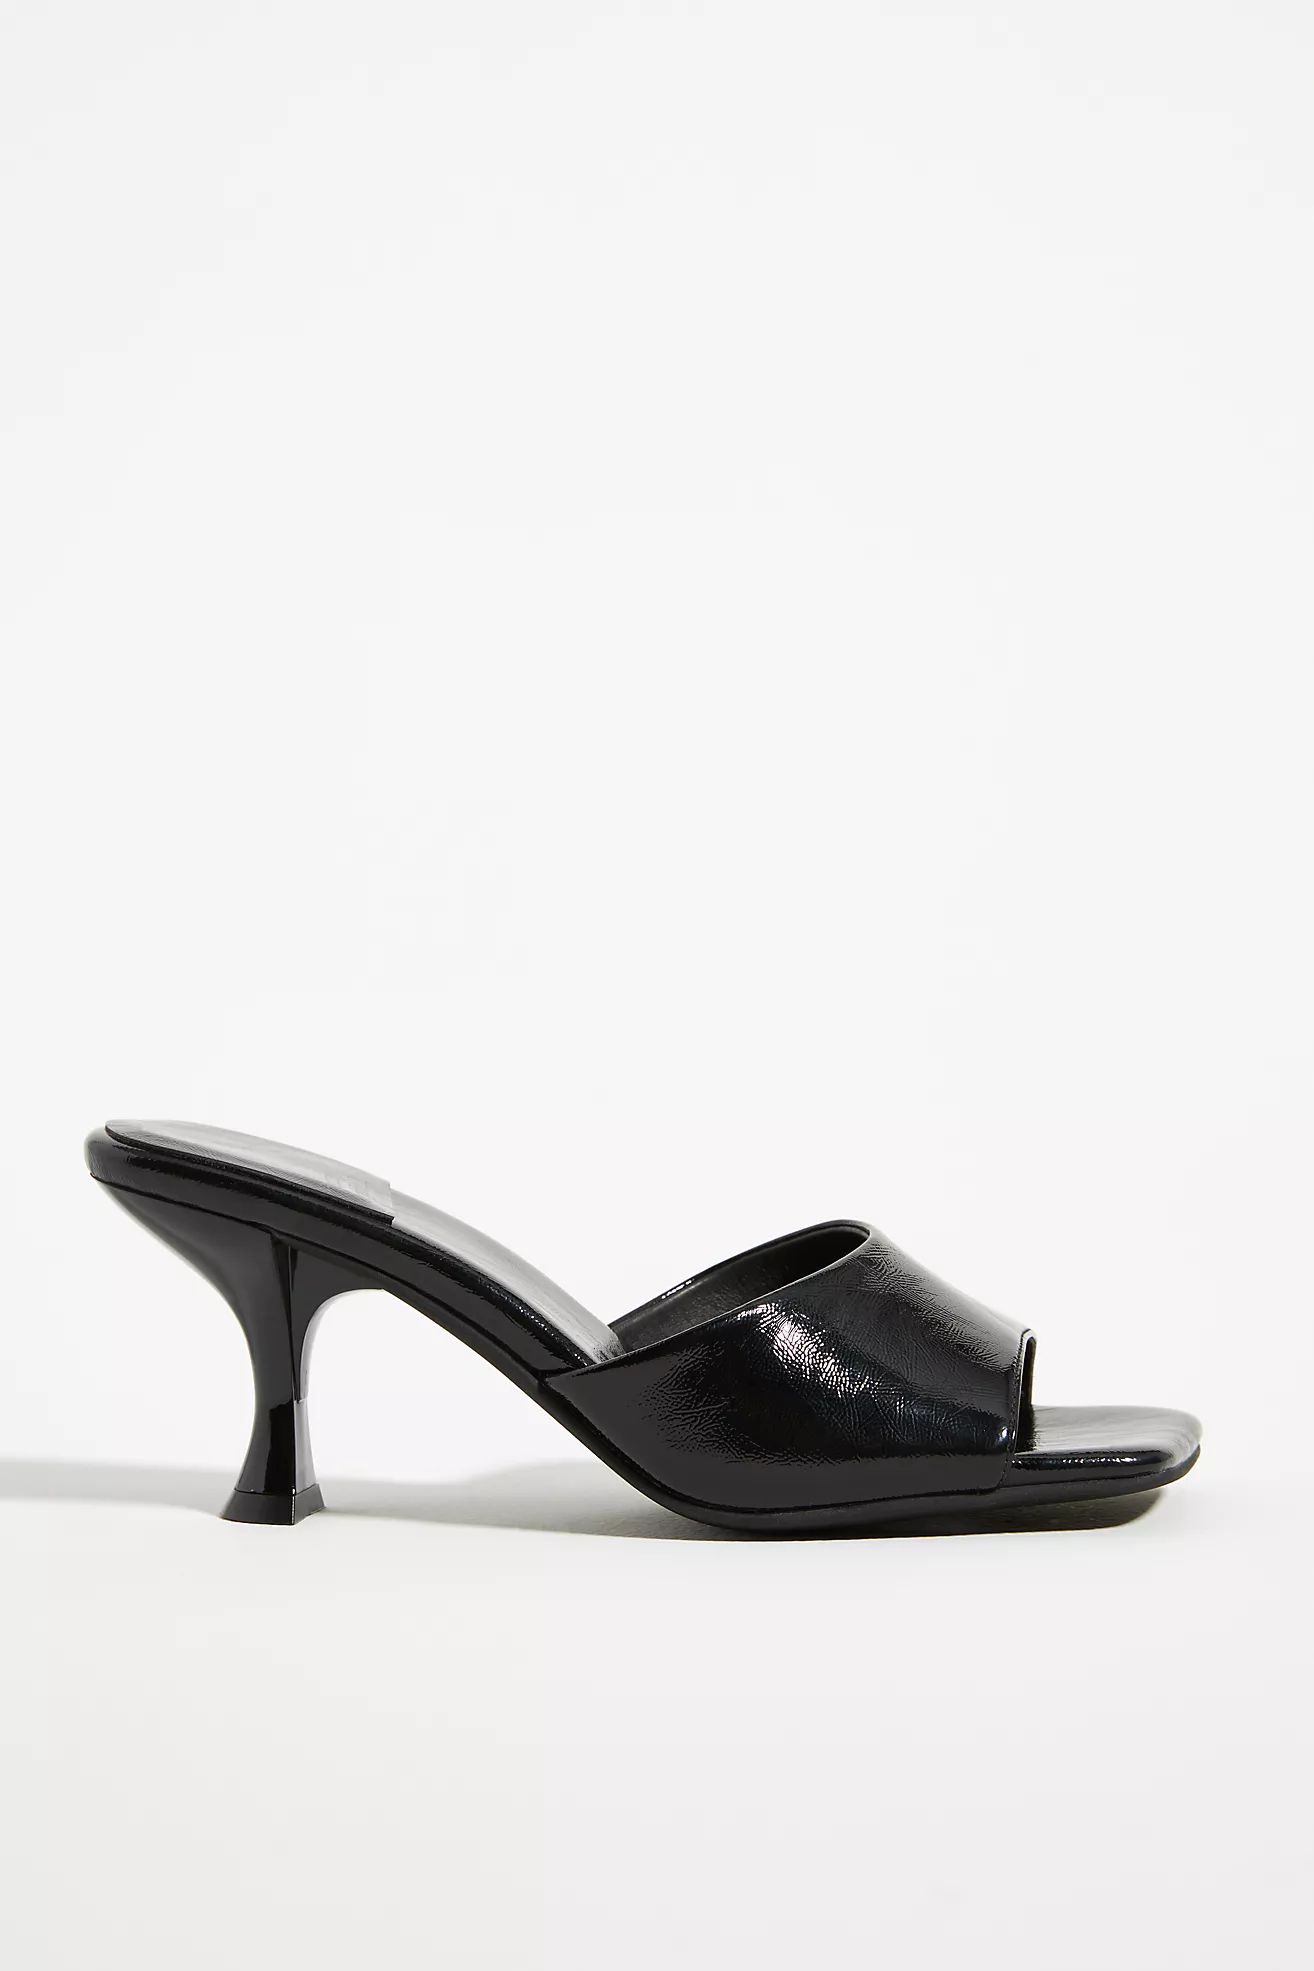 Jeffrey Campbell Square-Toe Mule | Anthropologie (US)